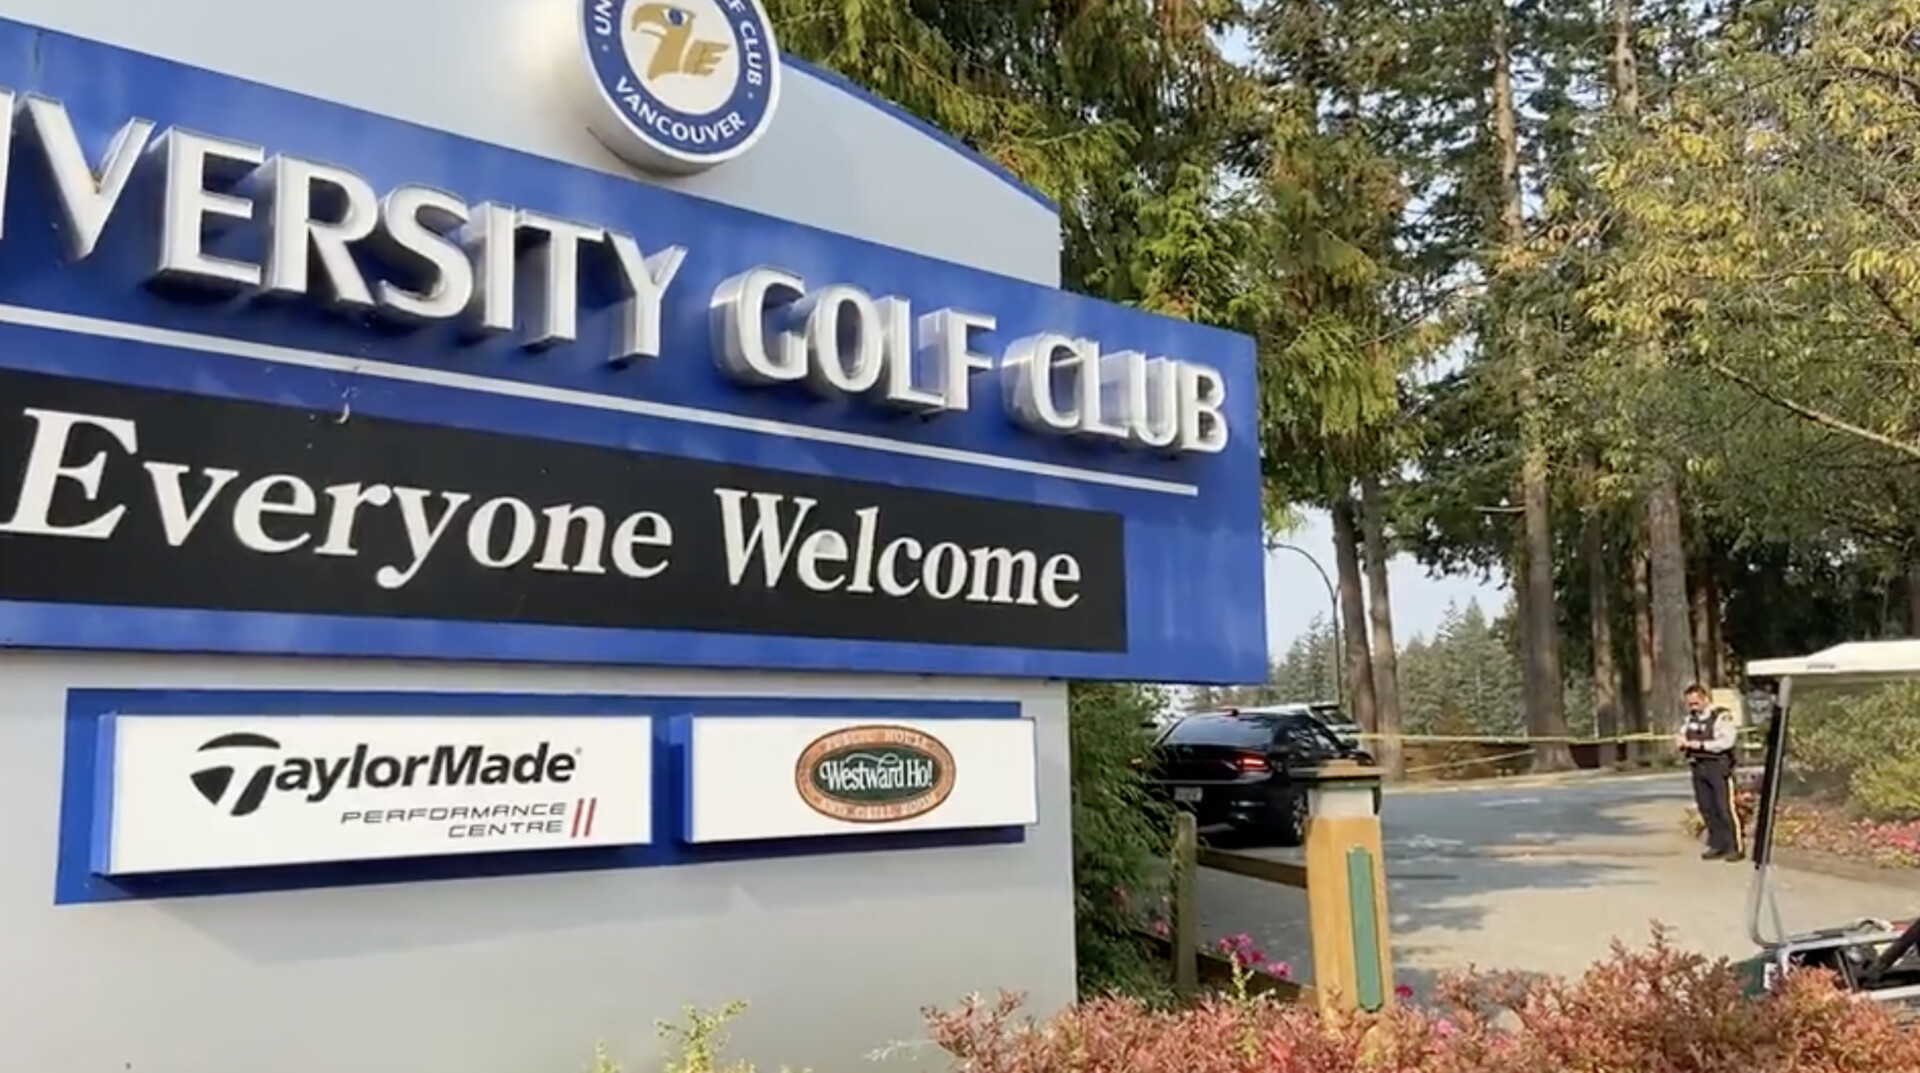 UBC Golf Course welcome sign